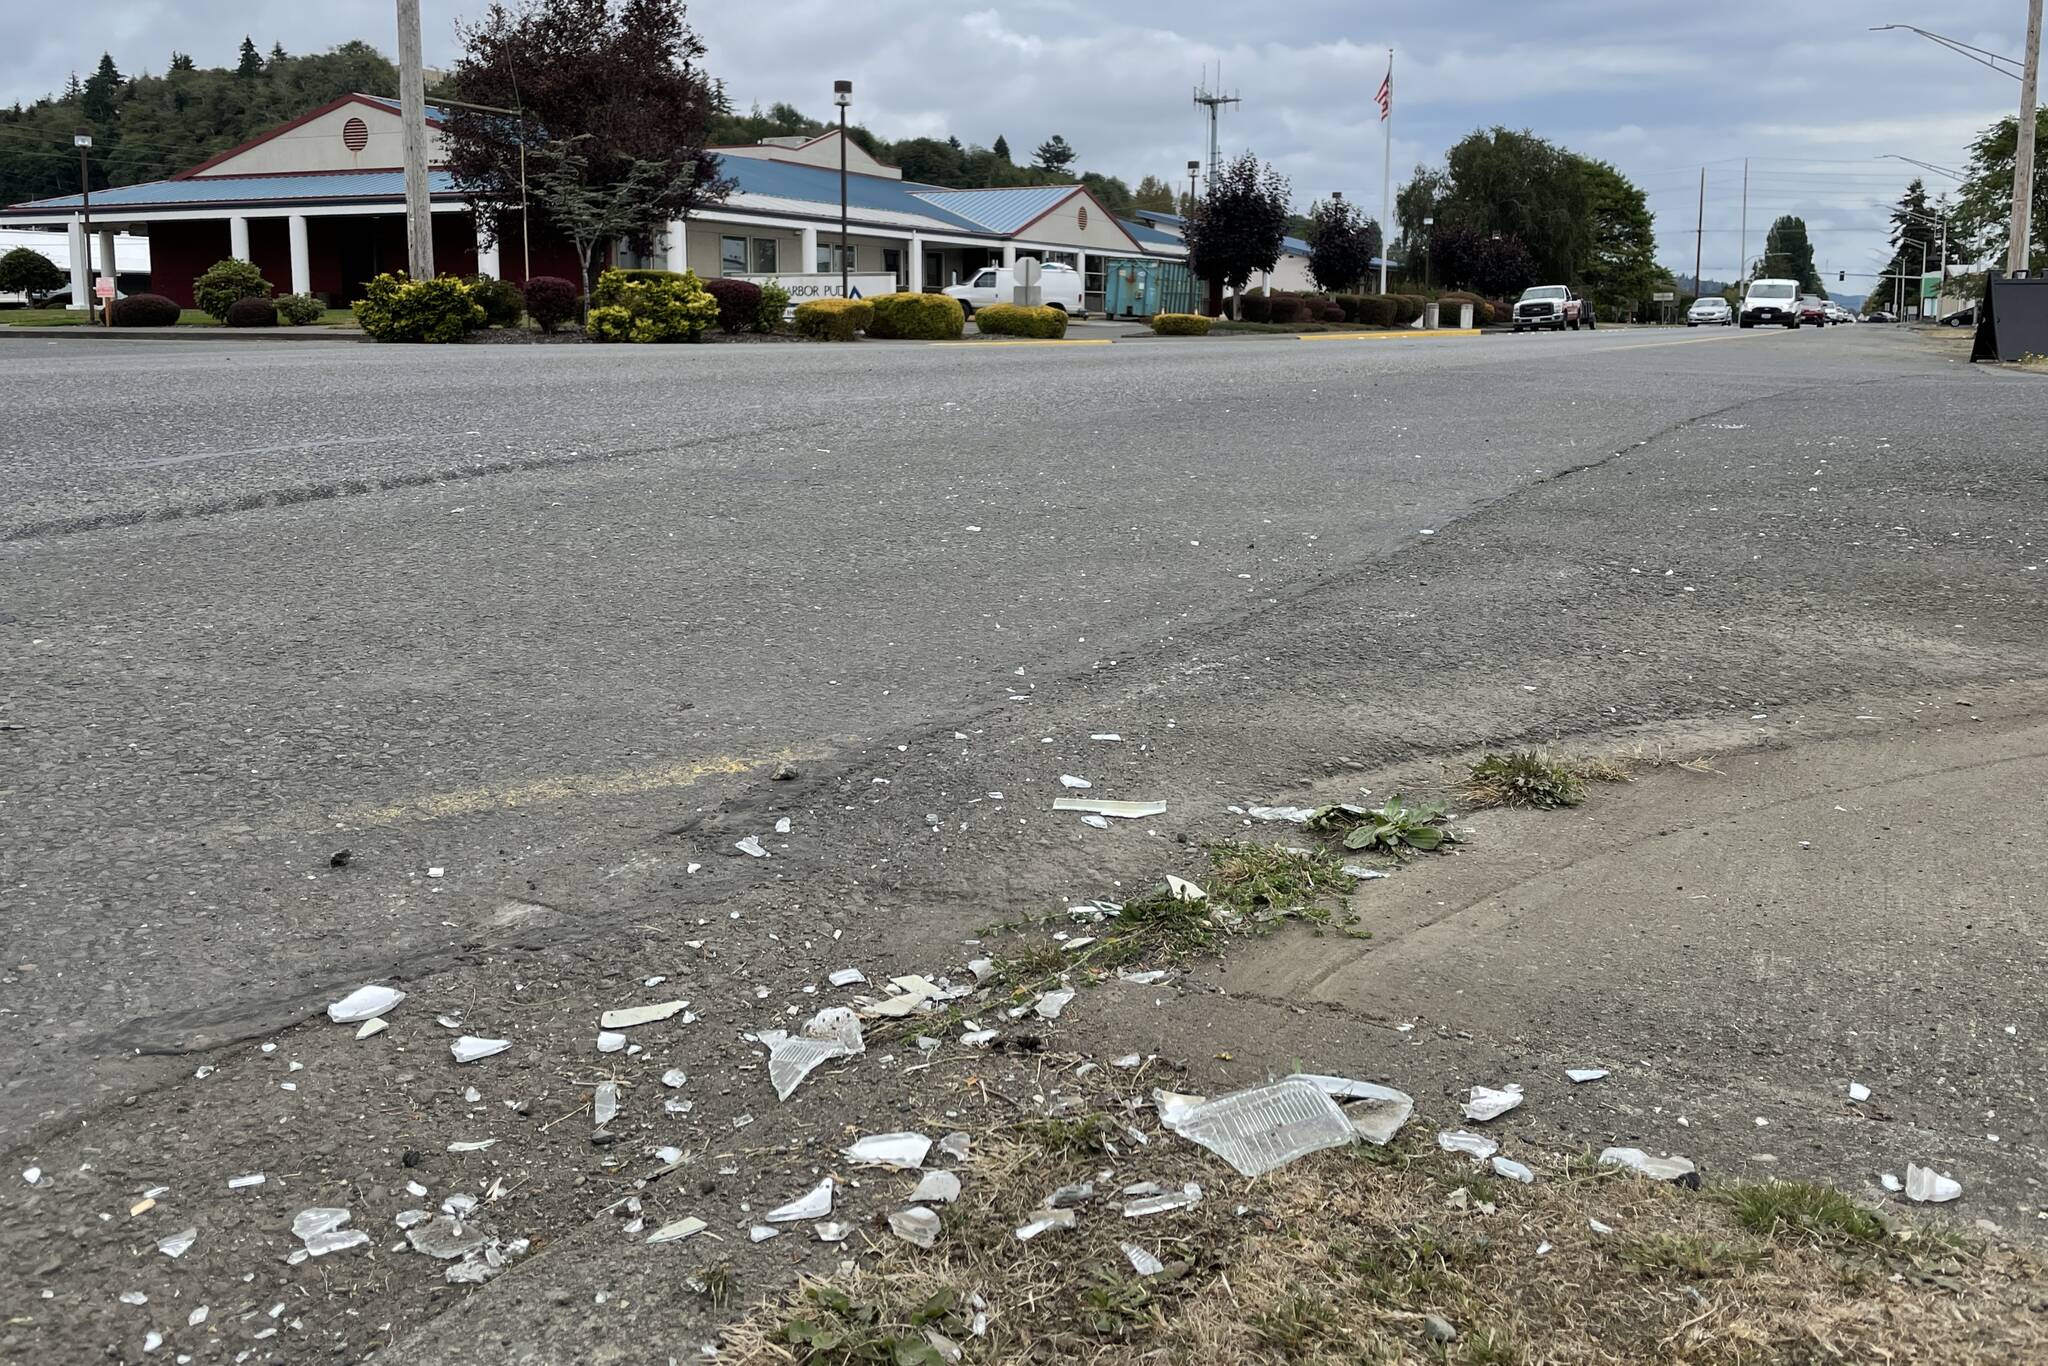 Debris from a motor vehicle crash decorates the corner of Sumner Avenue and Myrtle Street following a two-car crash on Tuesday, Sept. 13, 2022. (Michael S. Lockett / The Daily World)